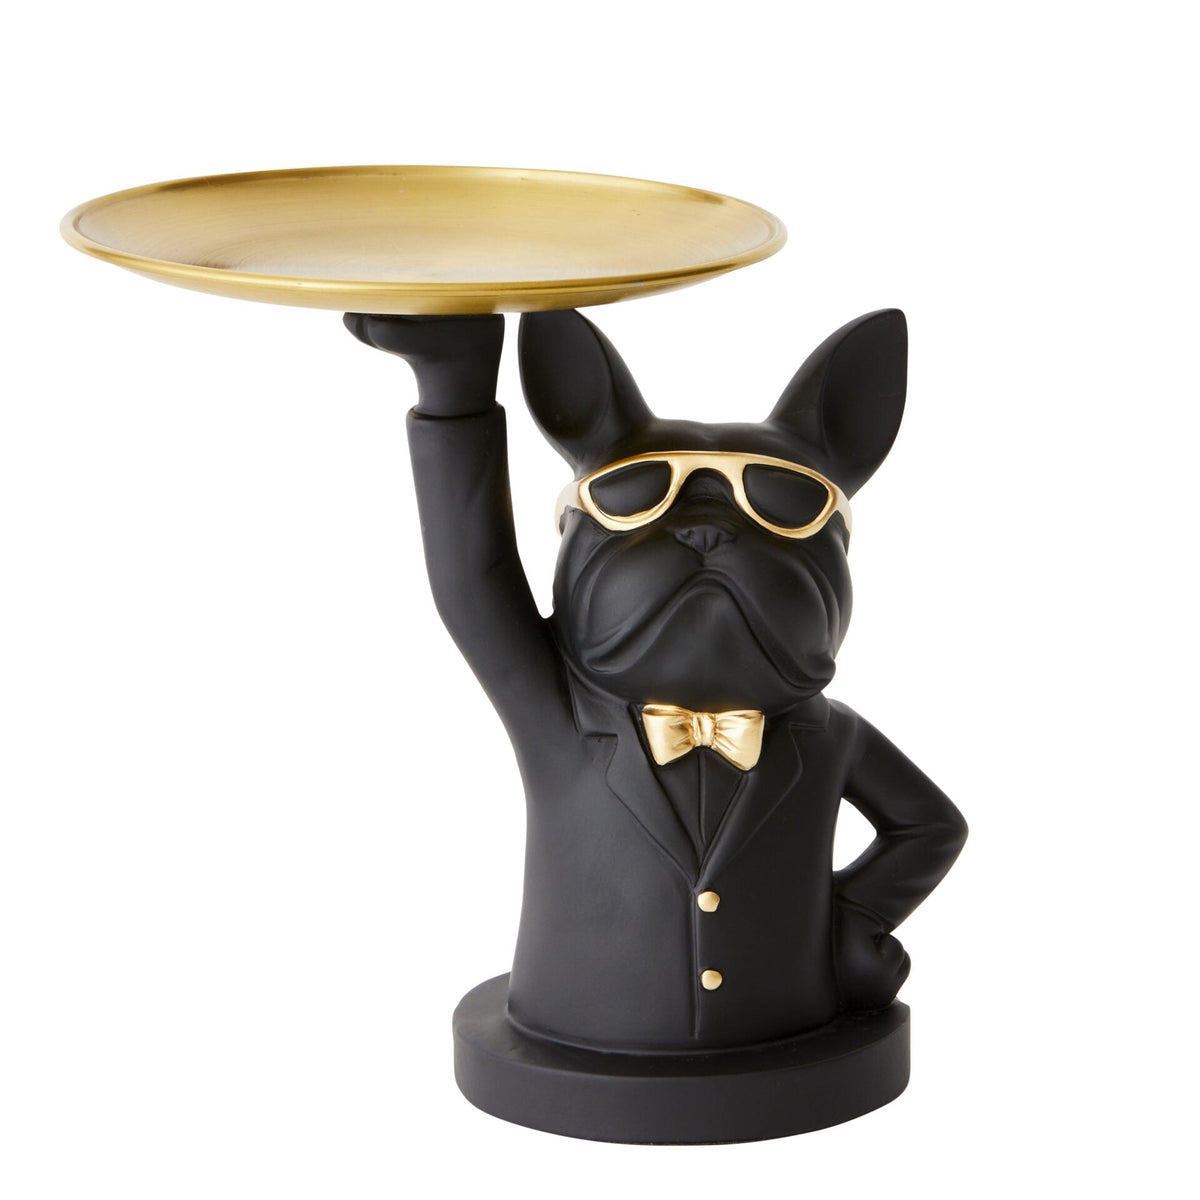 Butler Bulldog Resin Statue with Round Tray - Black - Notbrand